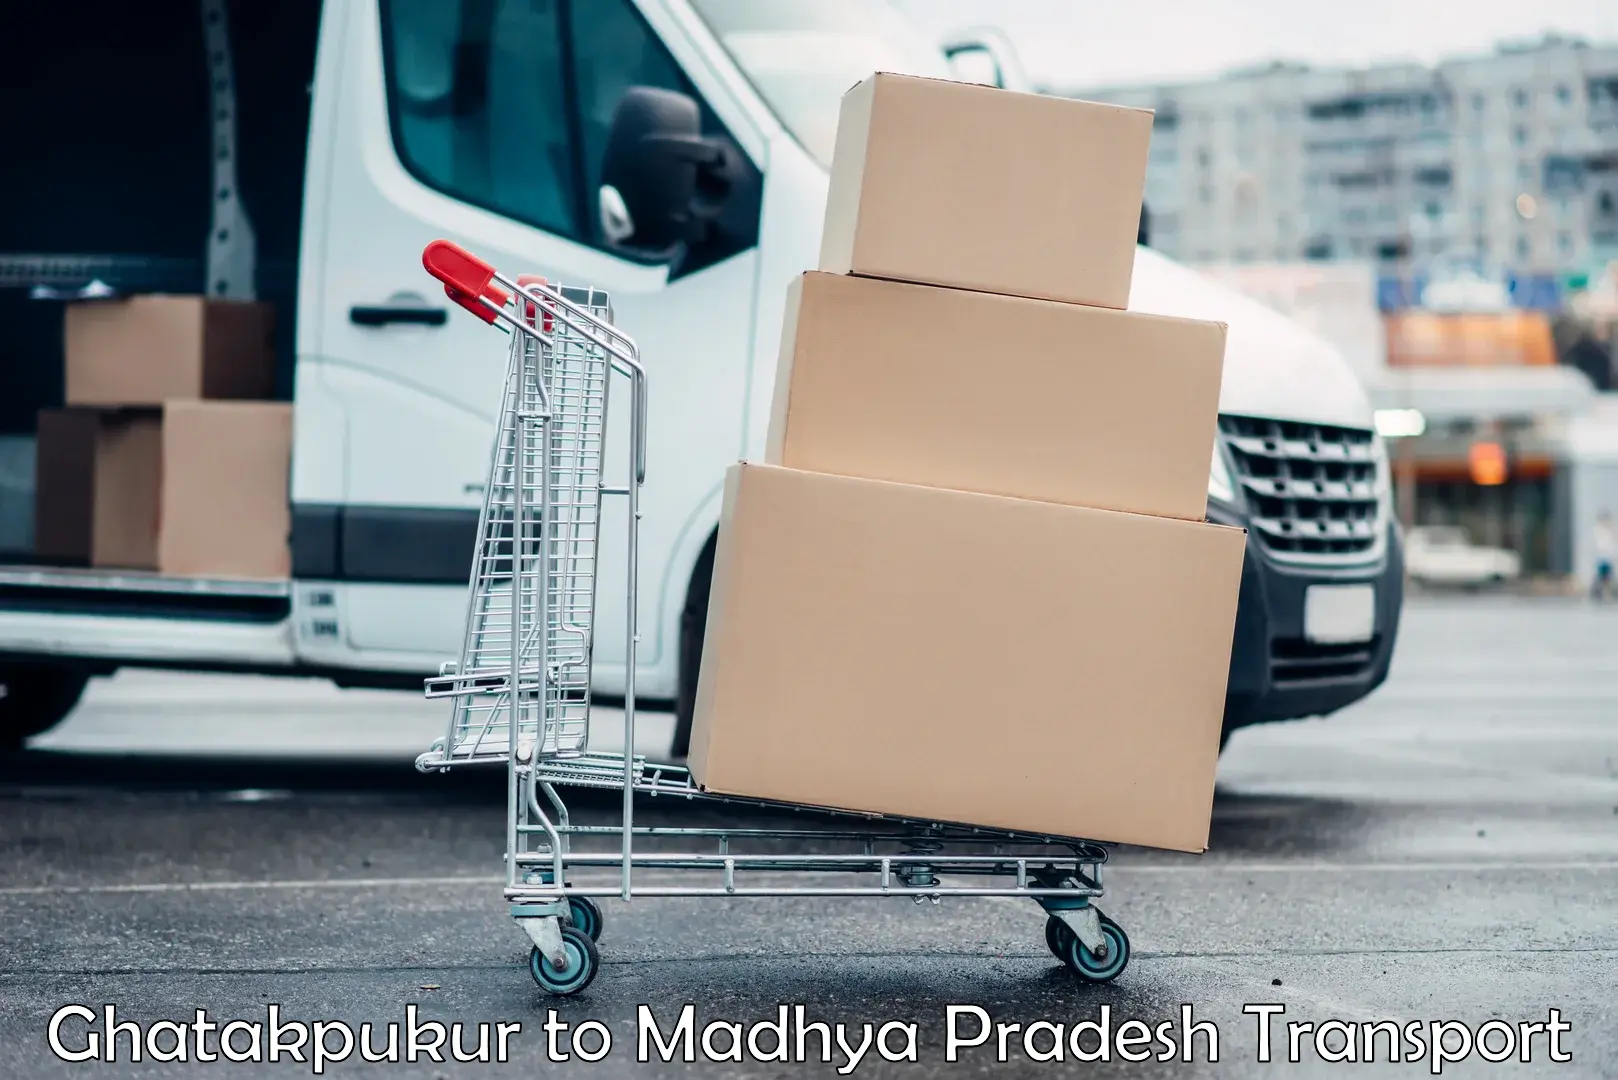 Vehicle courier services in Ghatakpukur to Sheopur